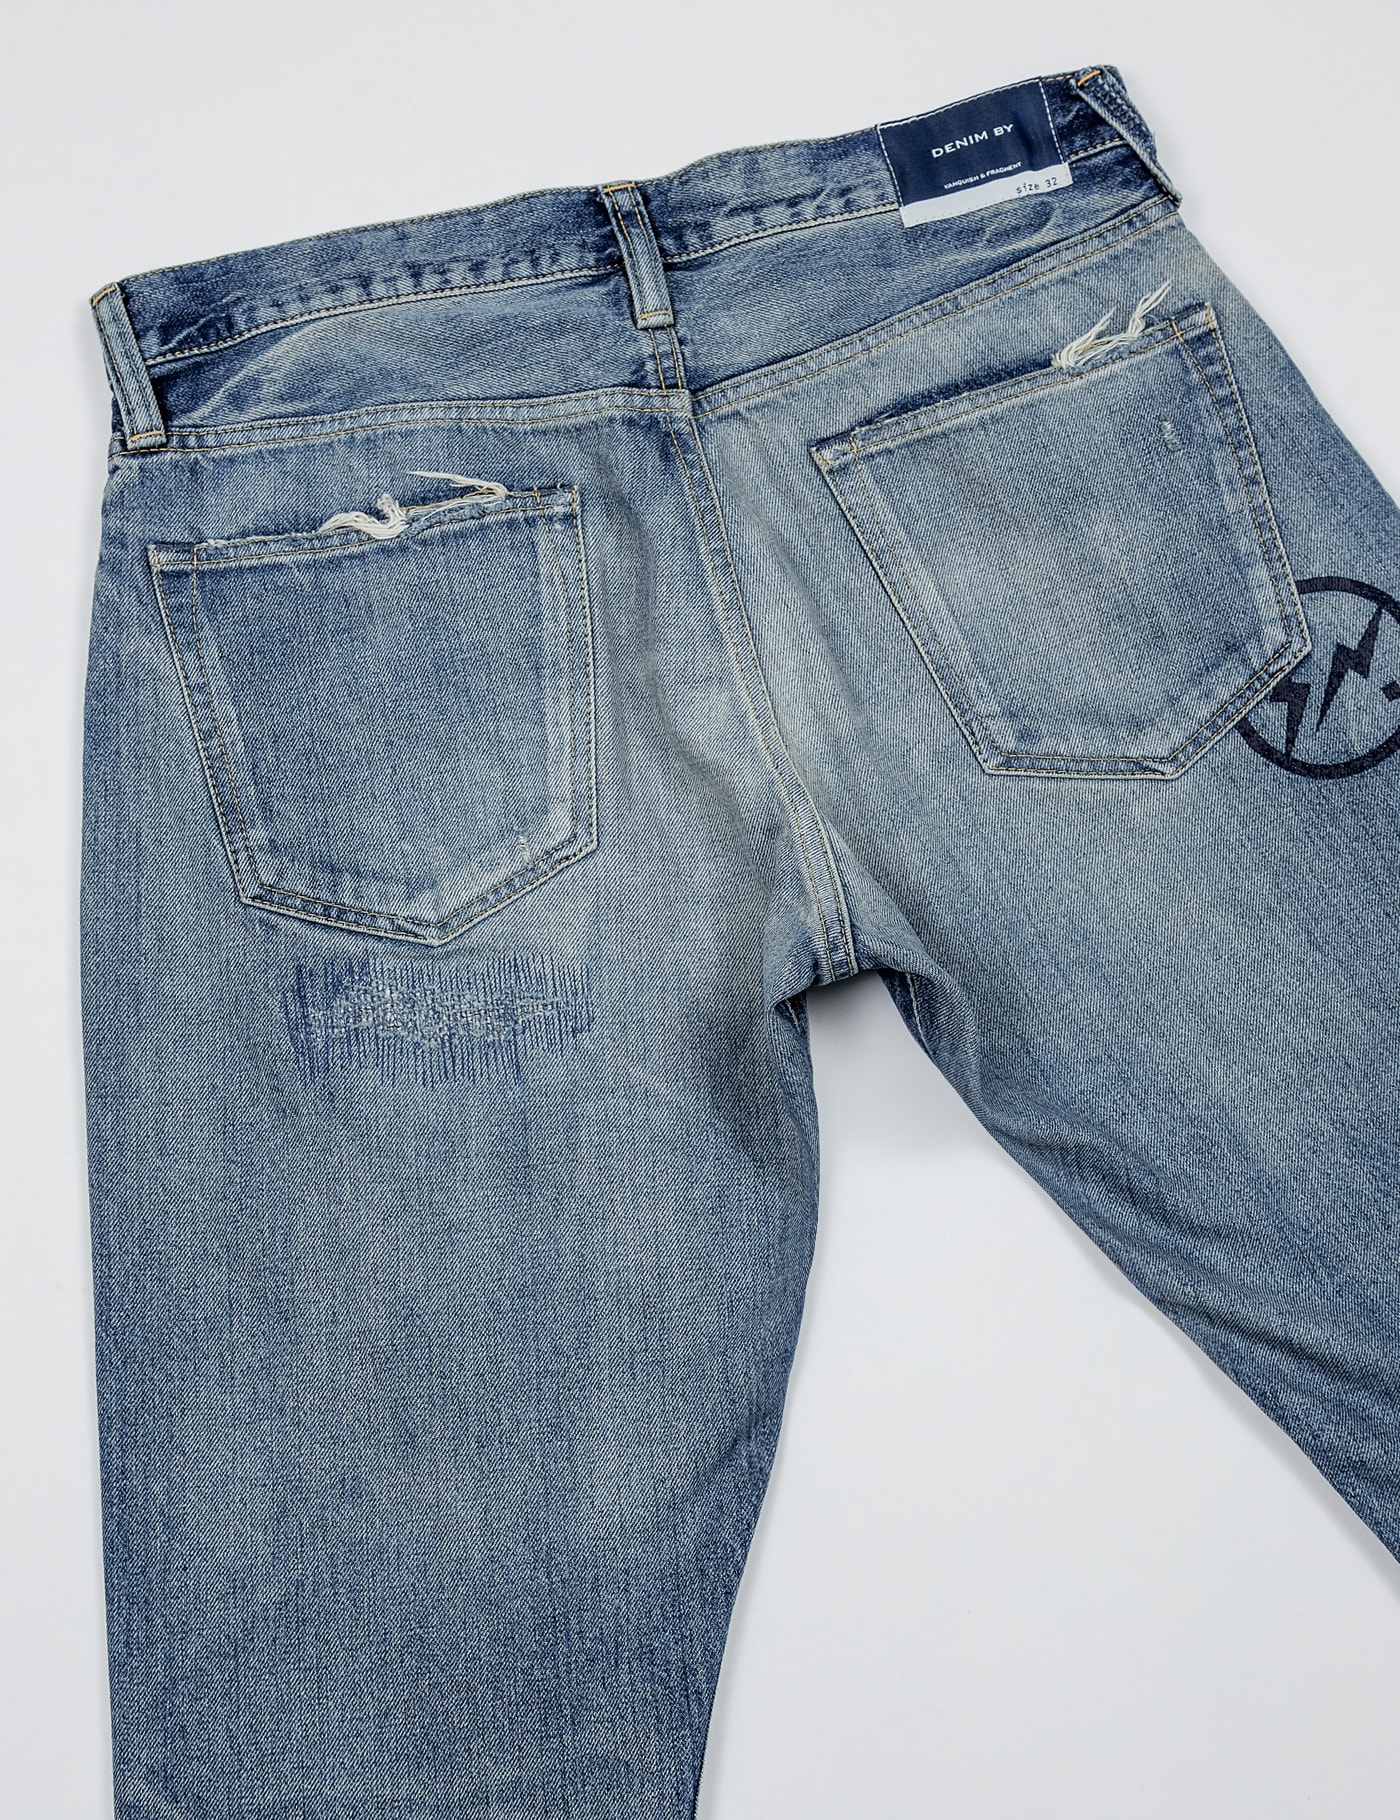 Denim By Vanquish & Fragment - Five Years Wash Tapered 9/10 Cropped